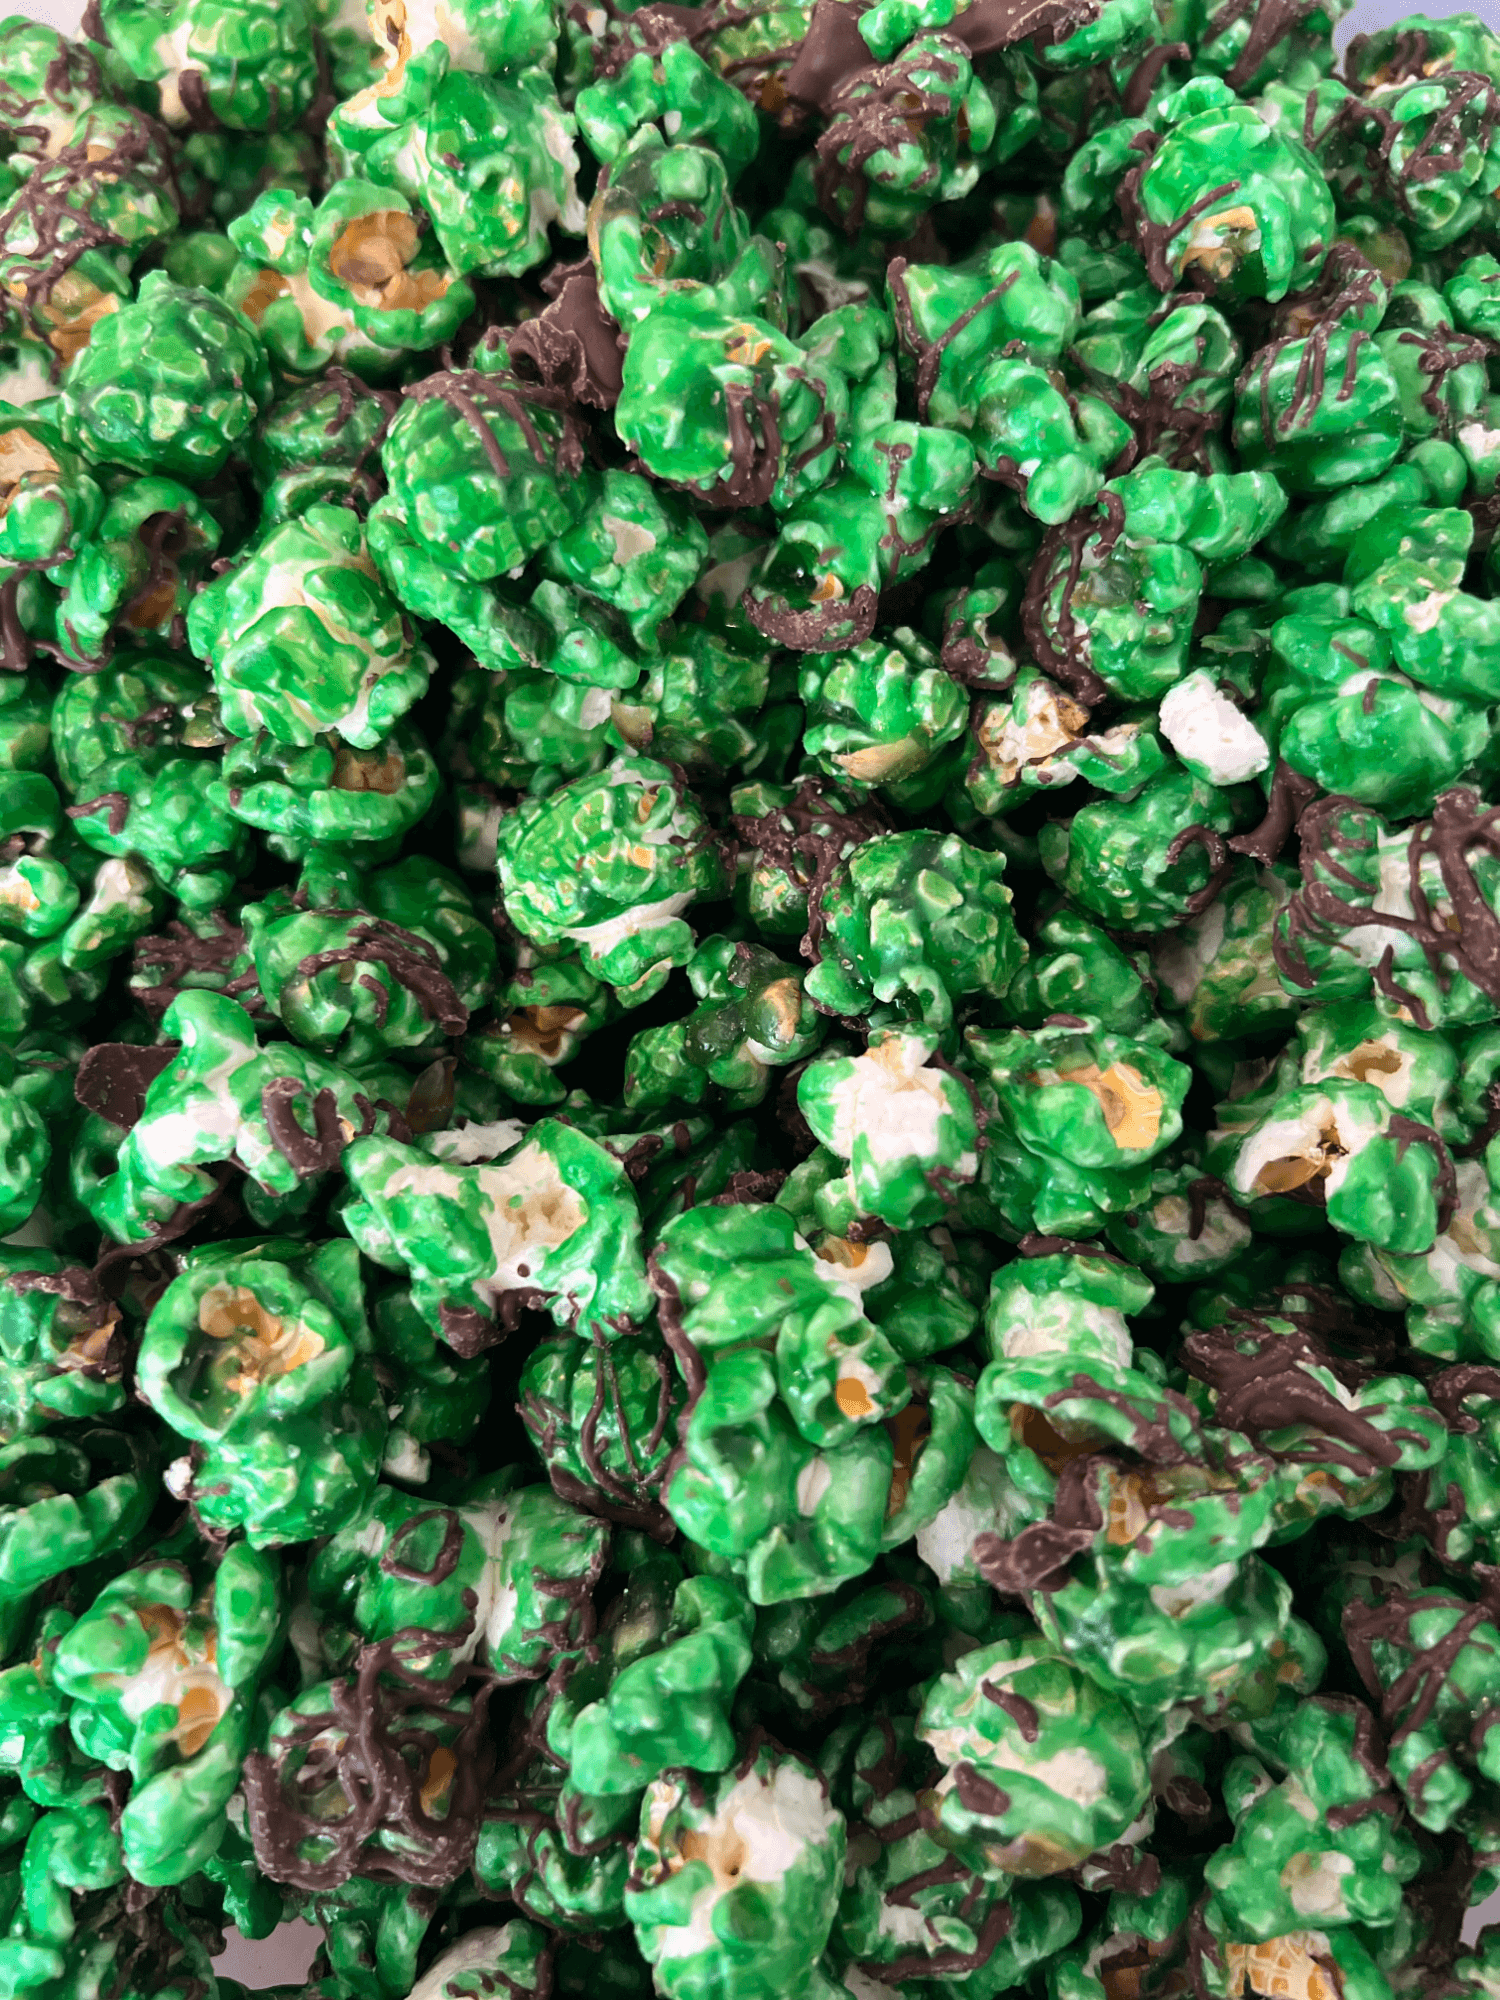 A close up of a pile of green and chocolate popcorn.